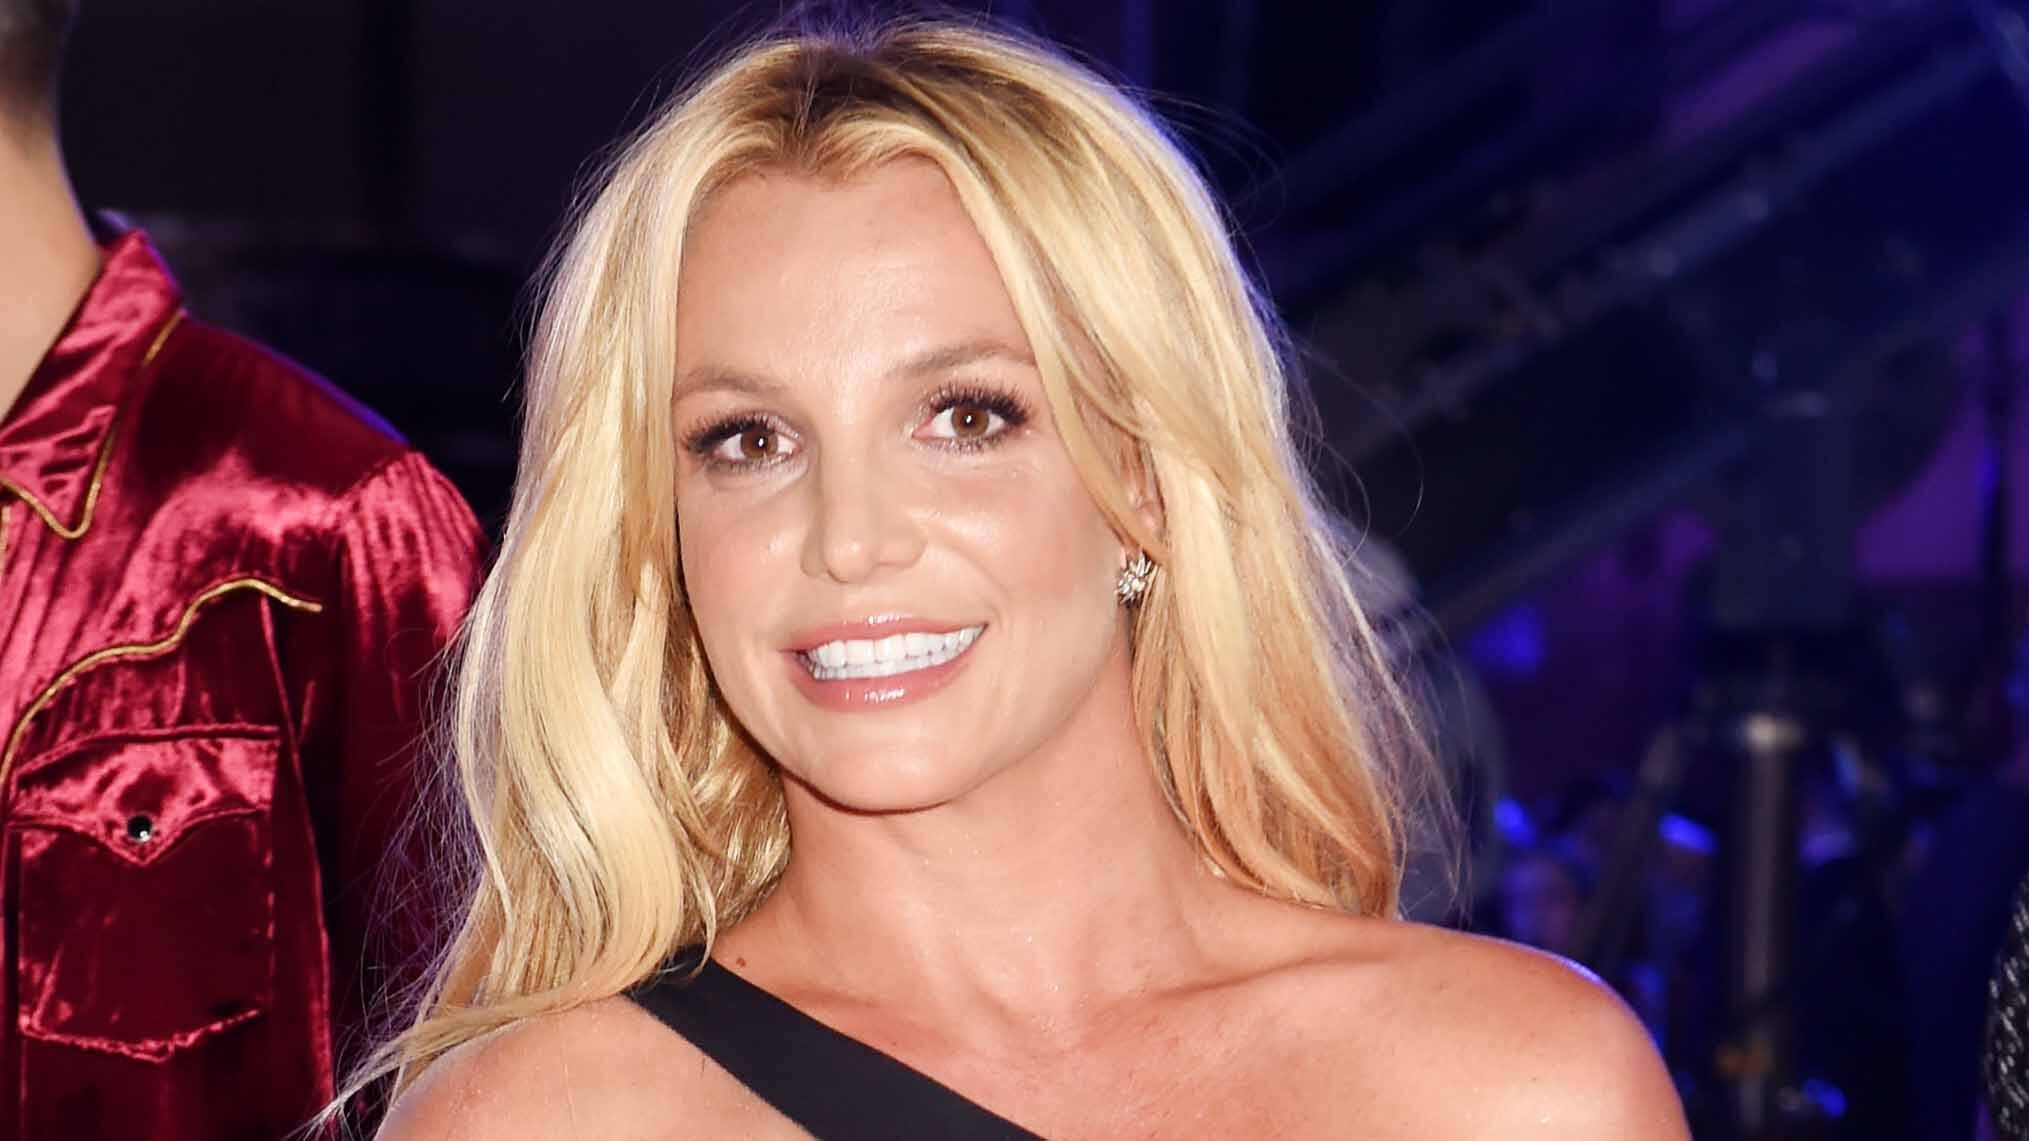 Britney Spears Looks Ahead to Year of 'Healing' on 39th Birthday Amid Legal Battle